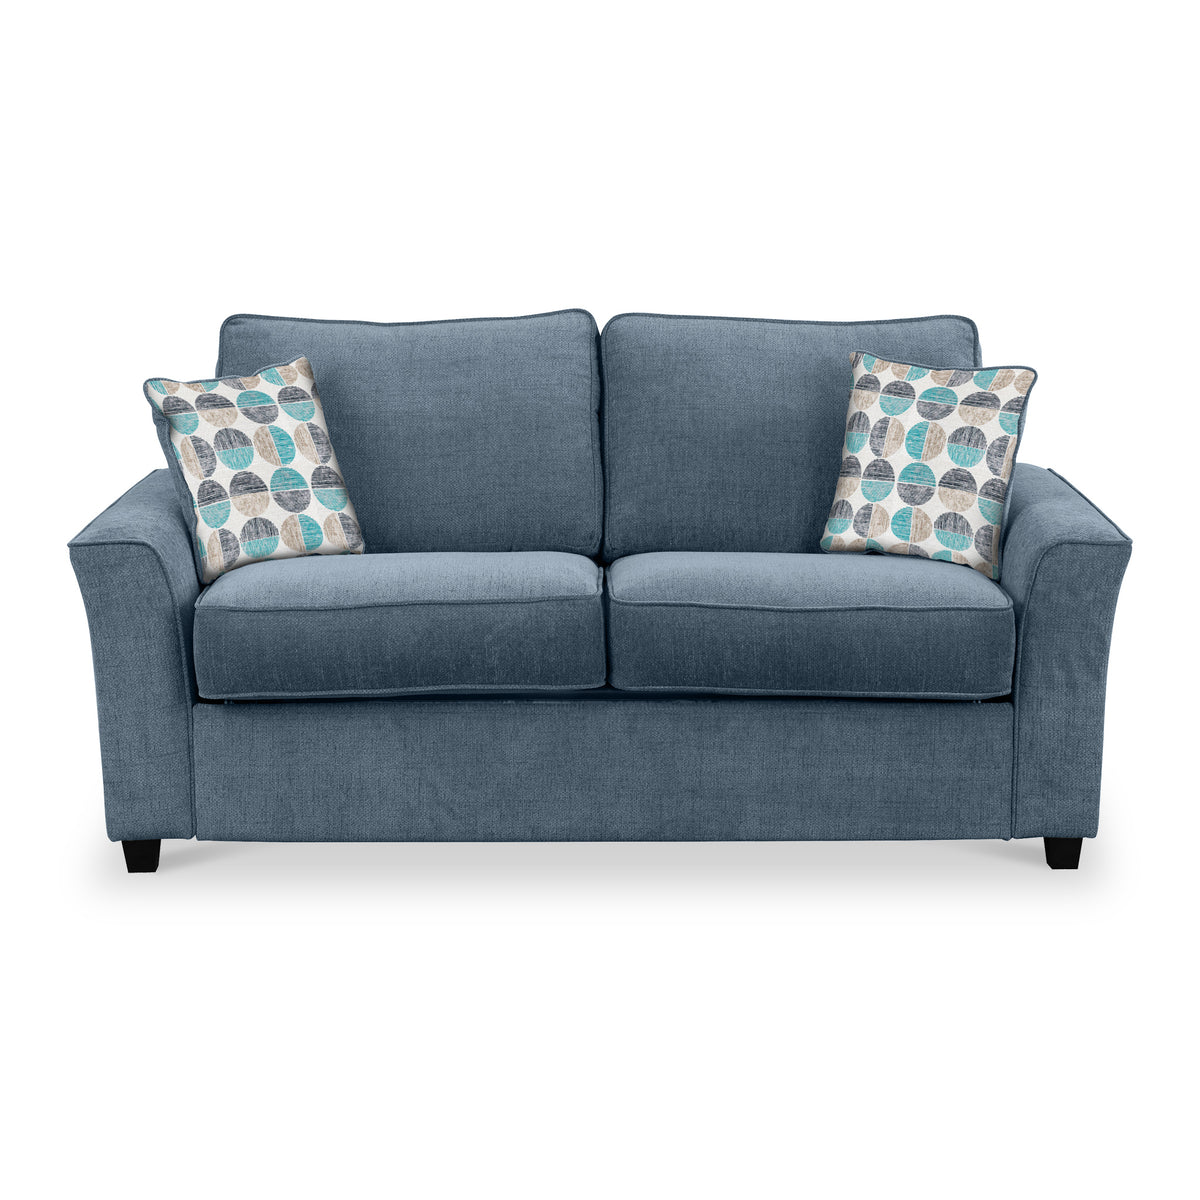 Boston 2 Seater Sofabed in Midnight with Rufus Duck Egg Cushions by Roseland Furniture